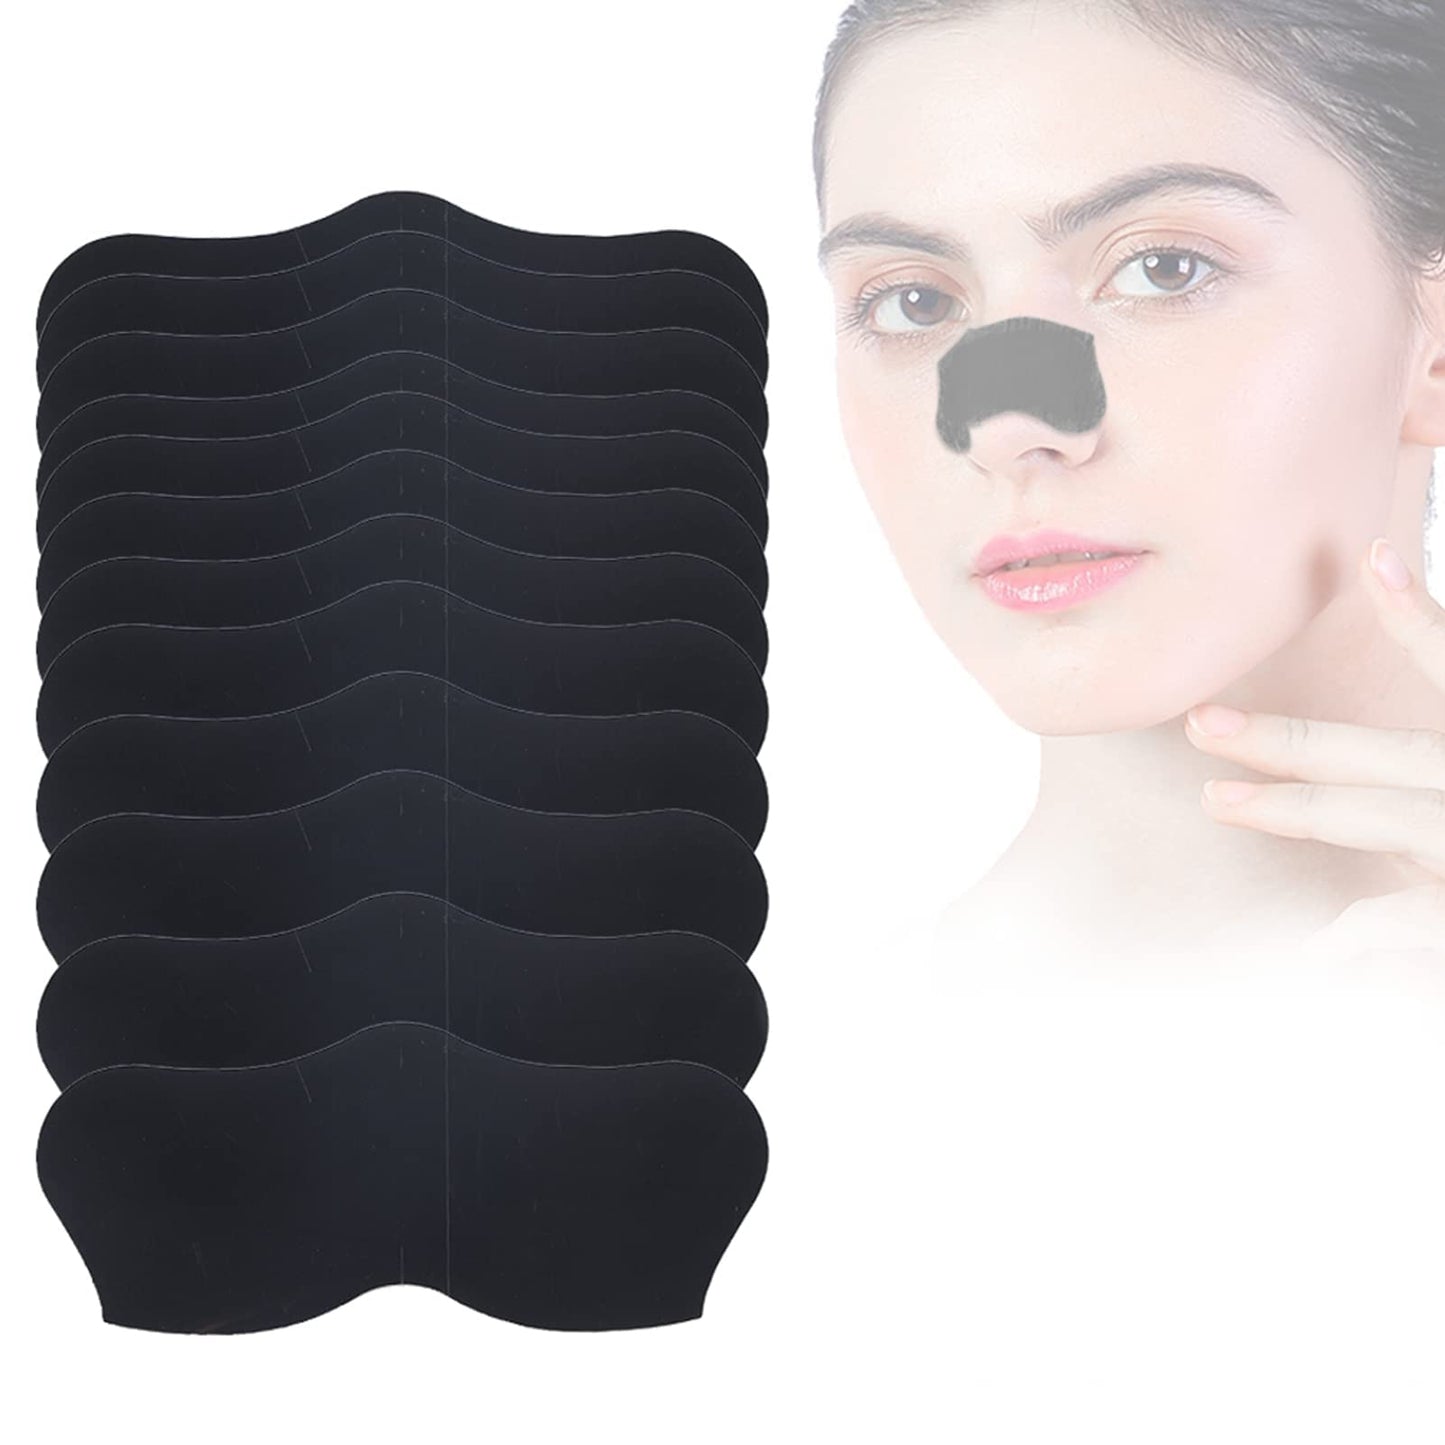 TYCA 30pcs Blackhead Nose Patchs Nose Acne Remover Strips Deep Cleansing Nose Pore Stickers for Use on Nose, Forehead and Chin